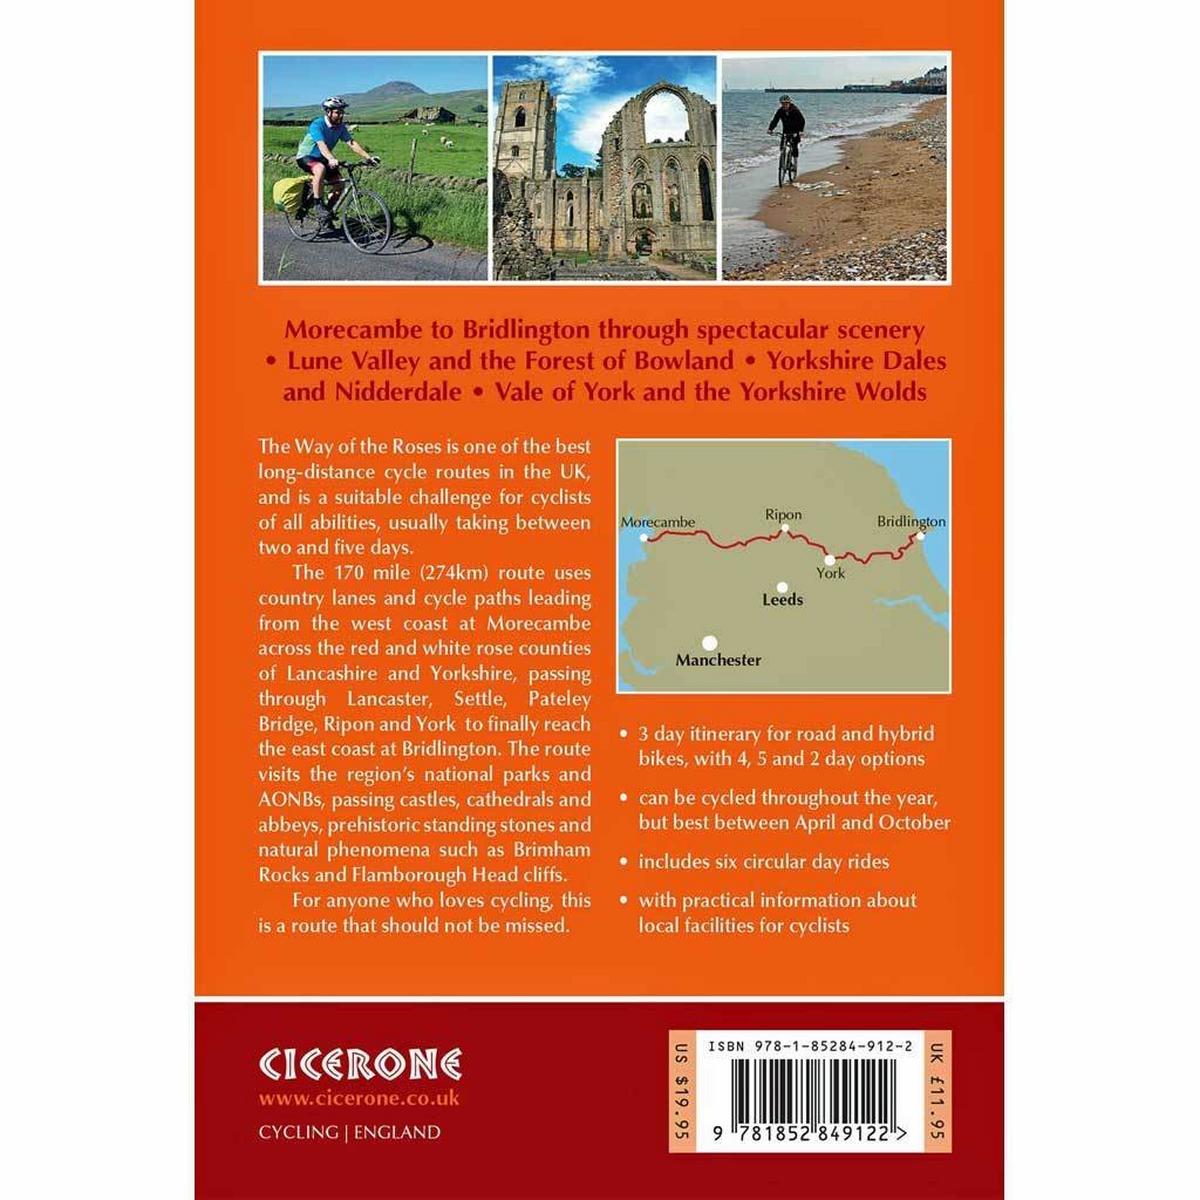 Cicerone Guide Book: Cycling the Way of the Roses